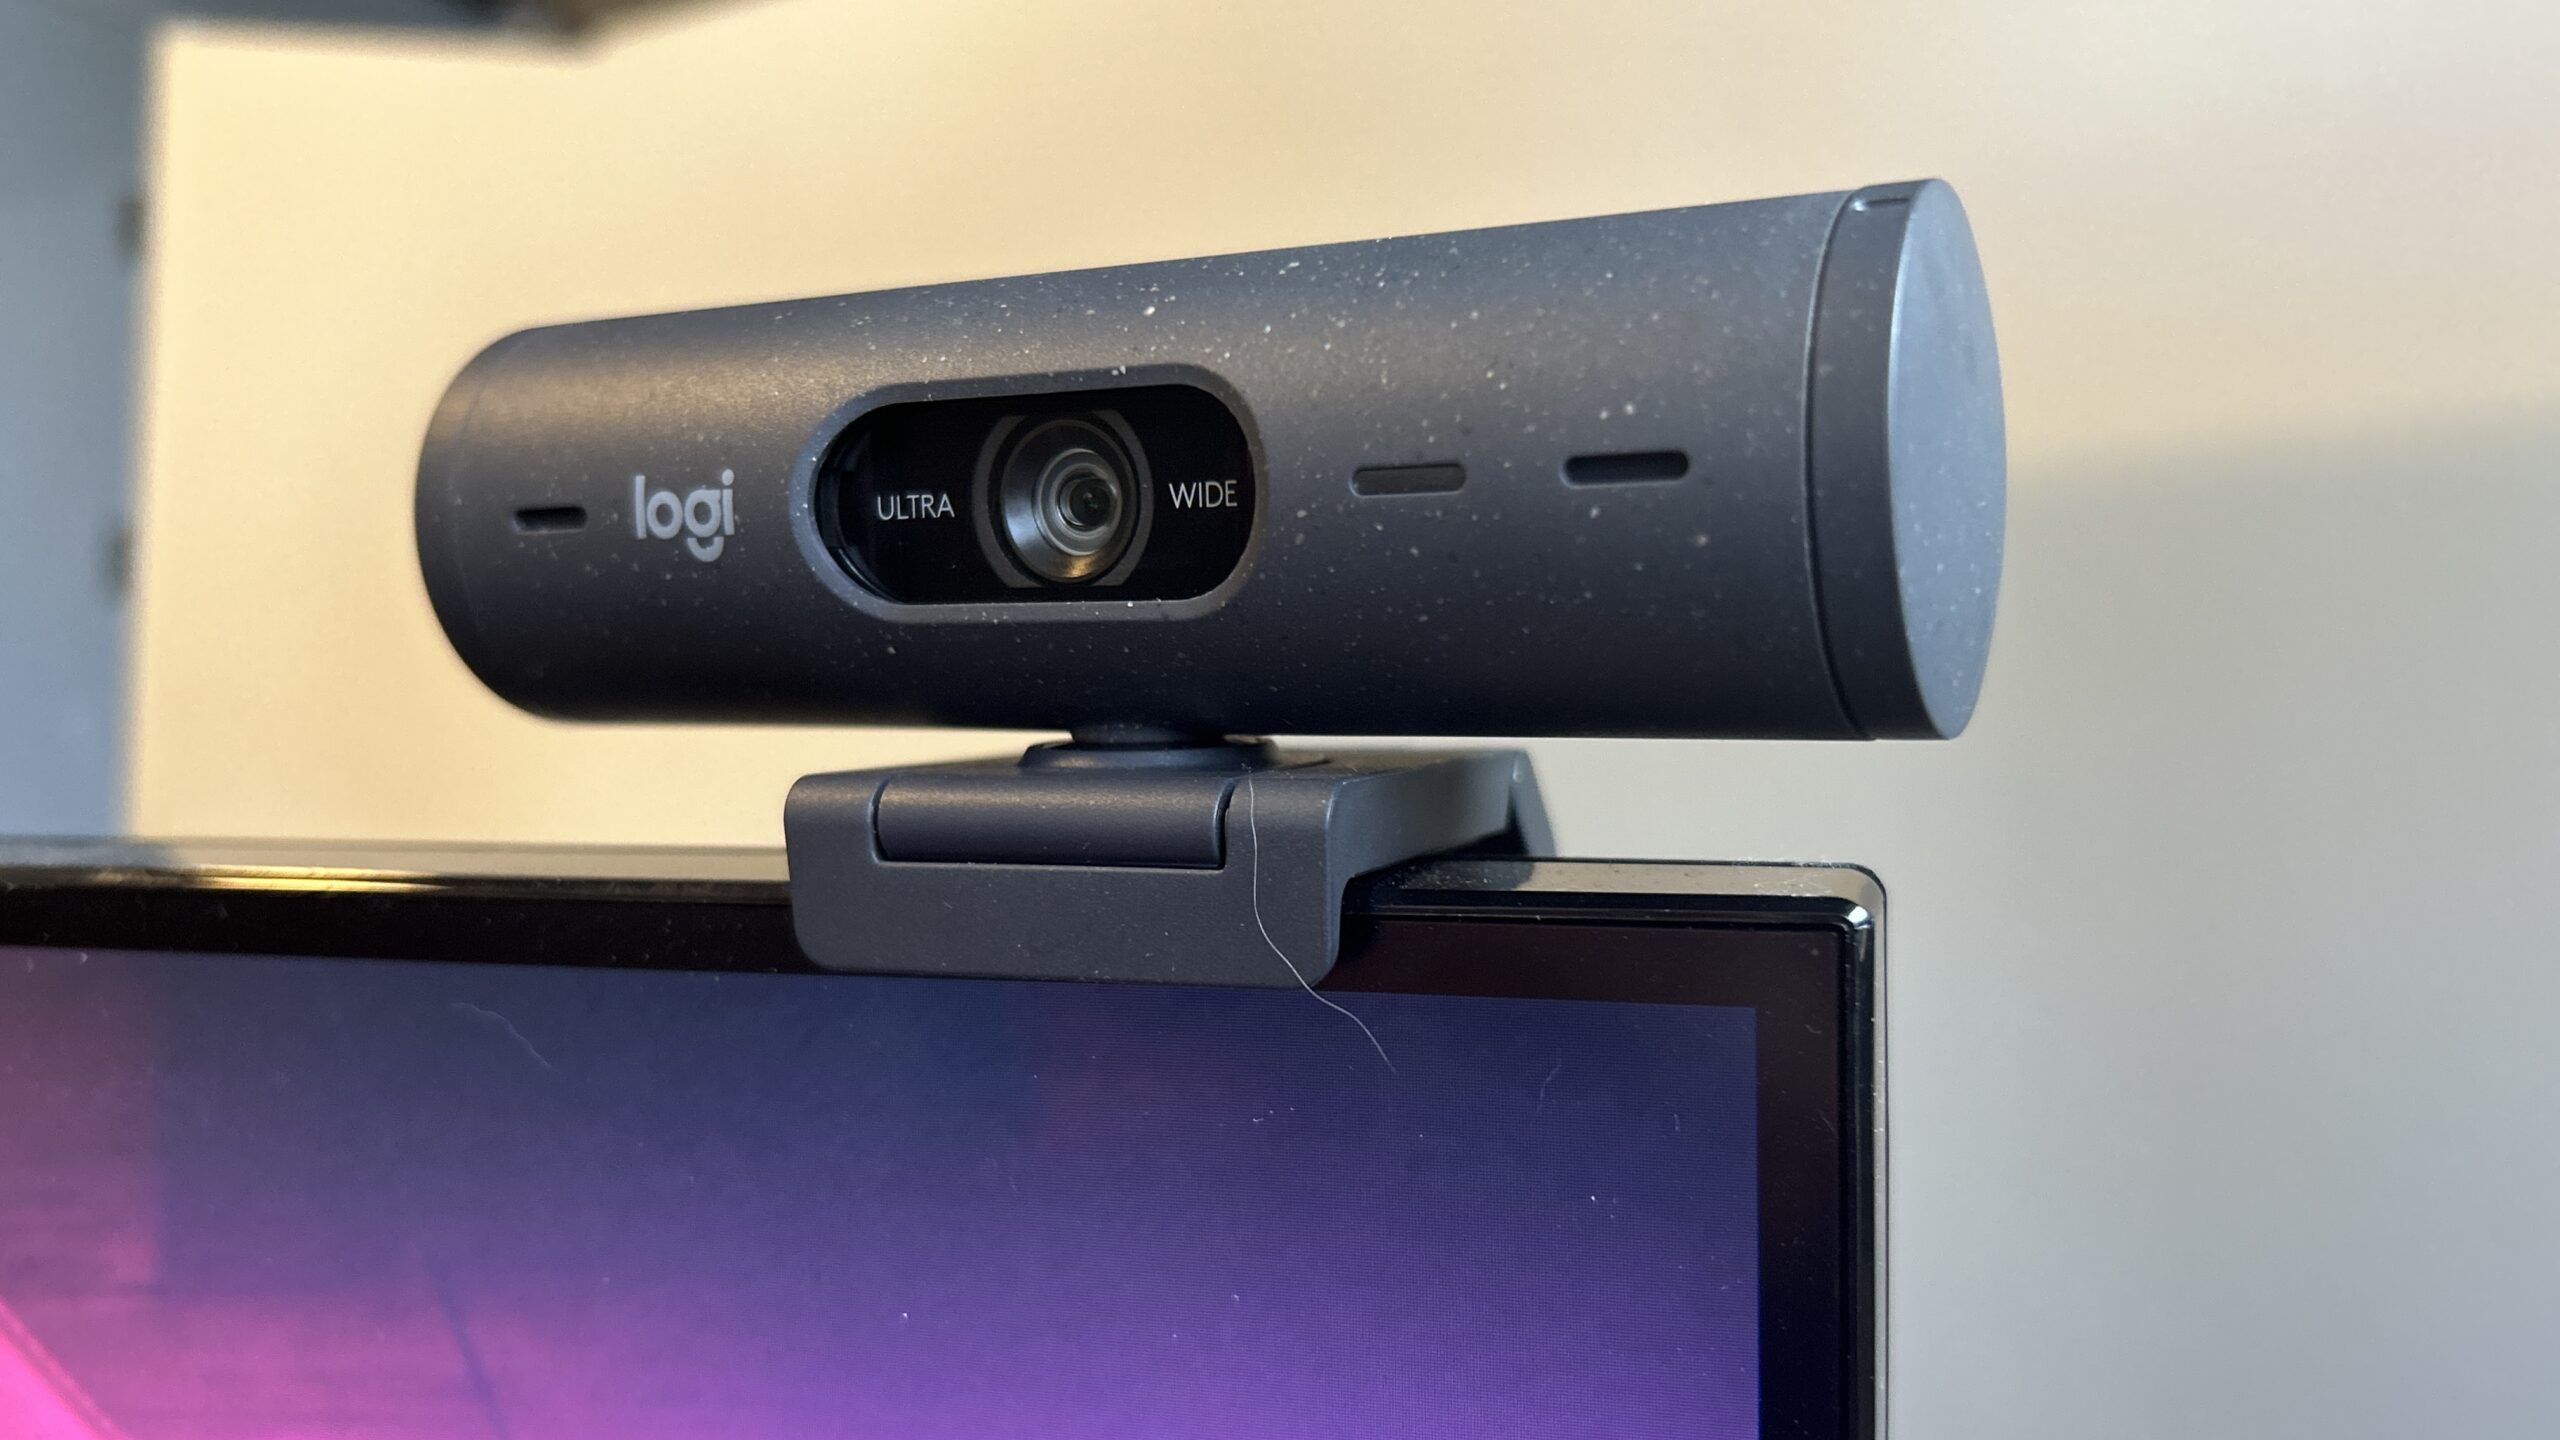 How to Turn on a Logitech Webcam